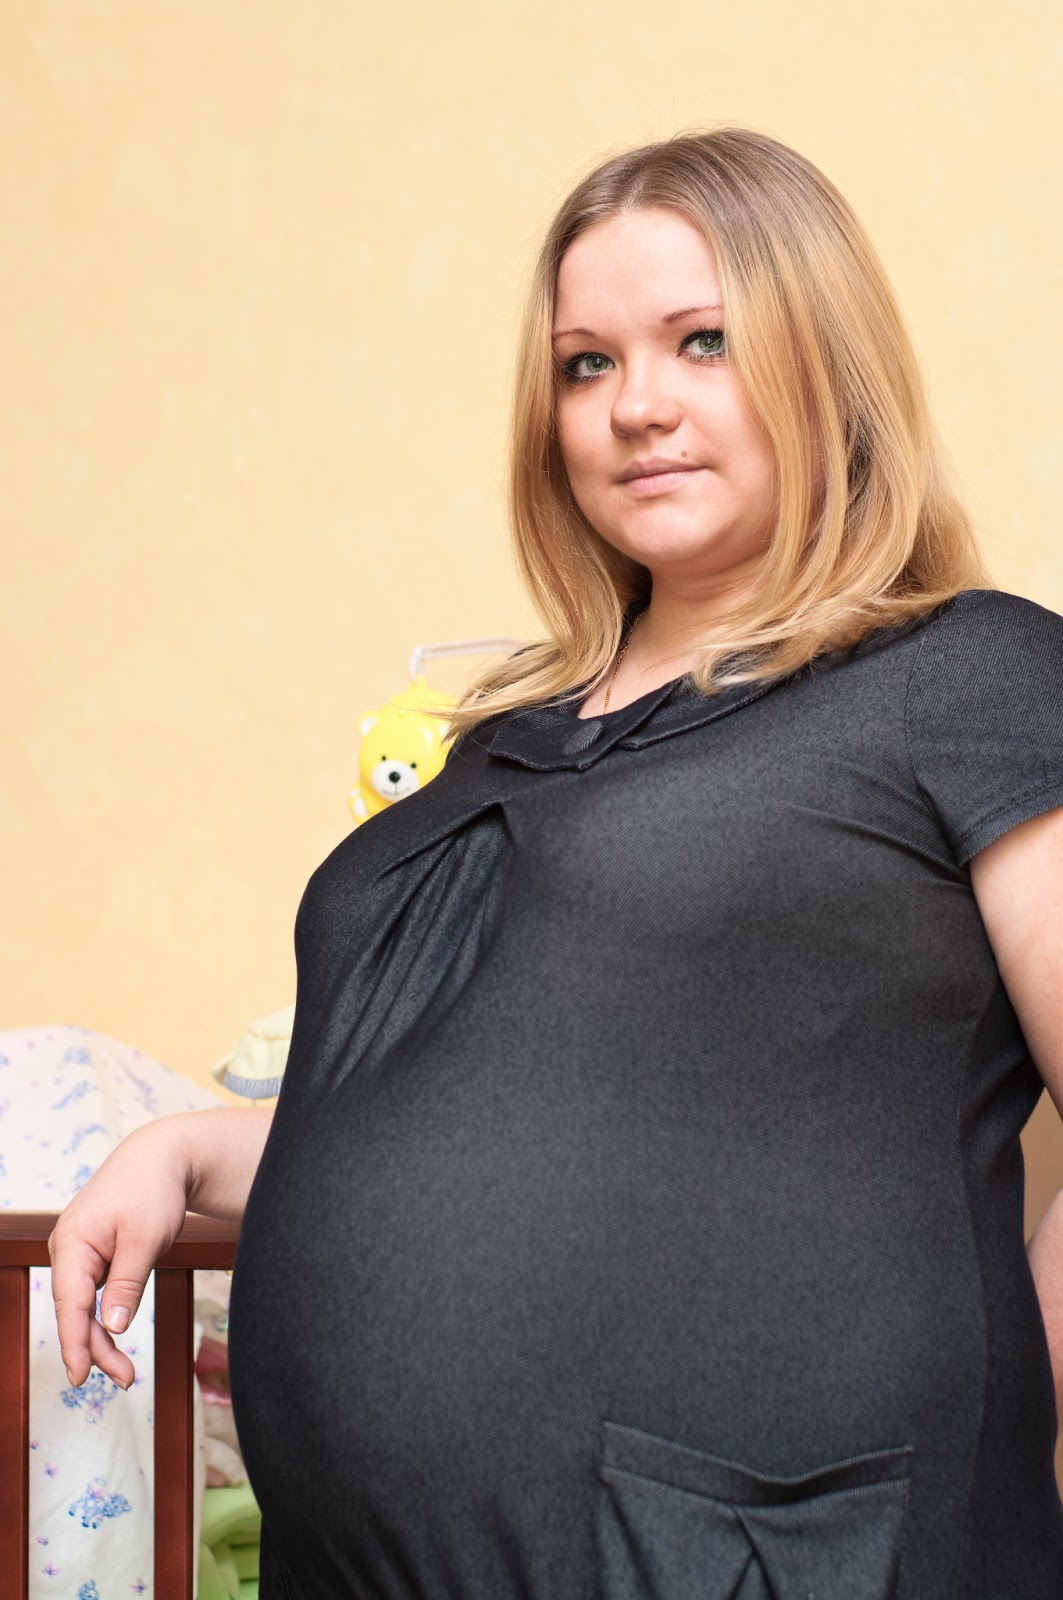 Pictures Of Obese Pregnant Women 111